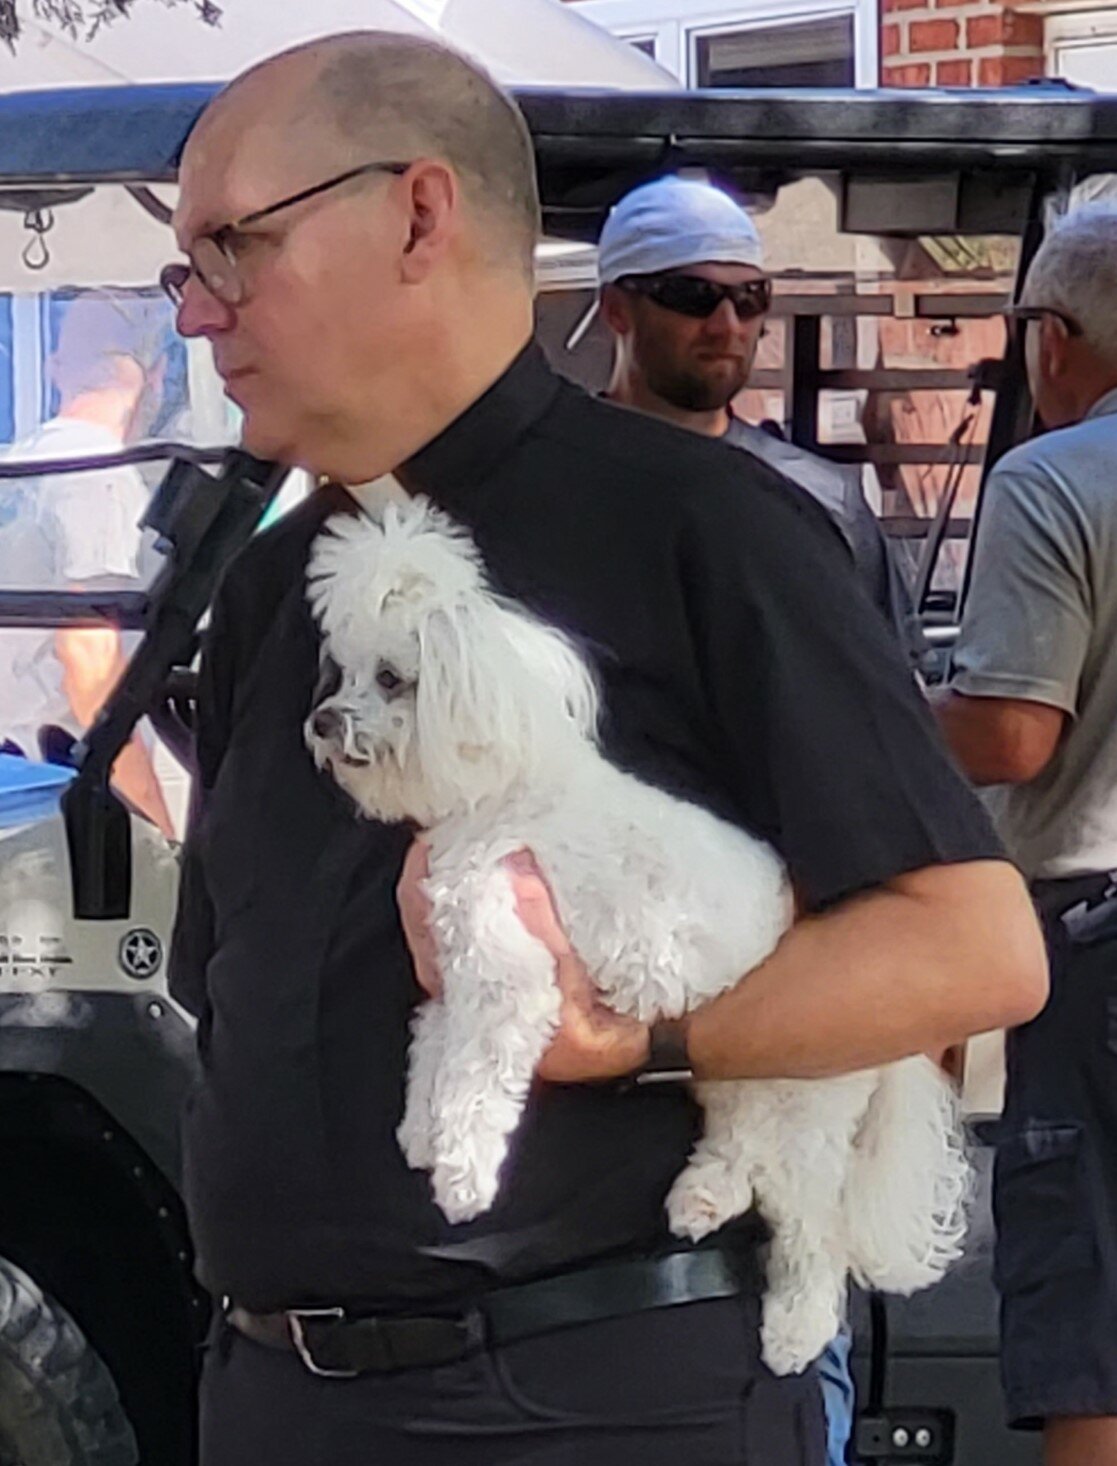 Father William Debo, pastor of pastor of Holy Family Parish in Freeburg and Sacred Heart Parish in Rich Fountain, and his Maltese dog, J.P., visit with parishioners at the Holy Family Parish Picnic Sept. 3.